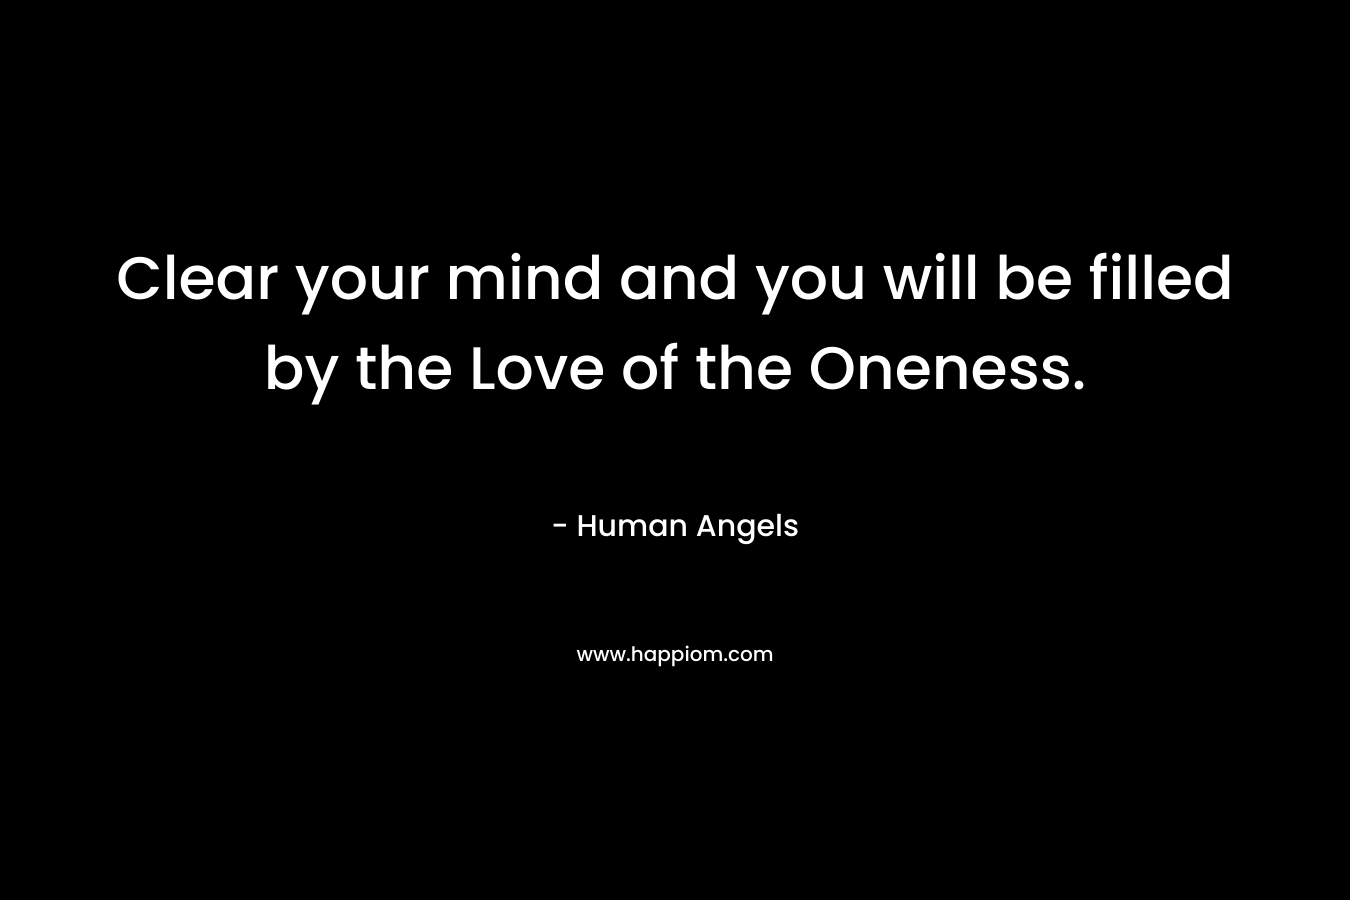 Clear your mind and you will be filled by the Love of the Oneness.